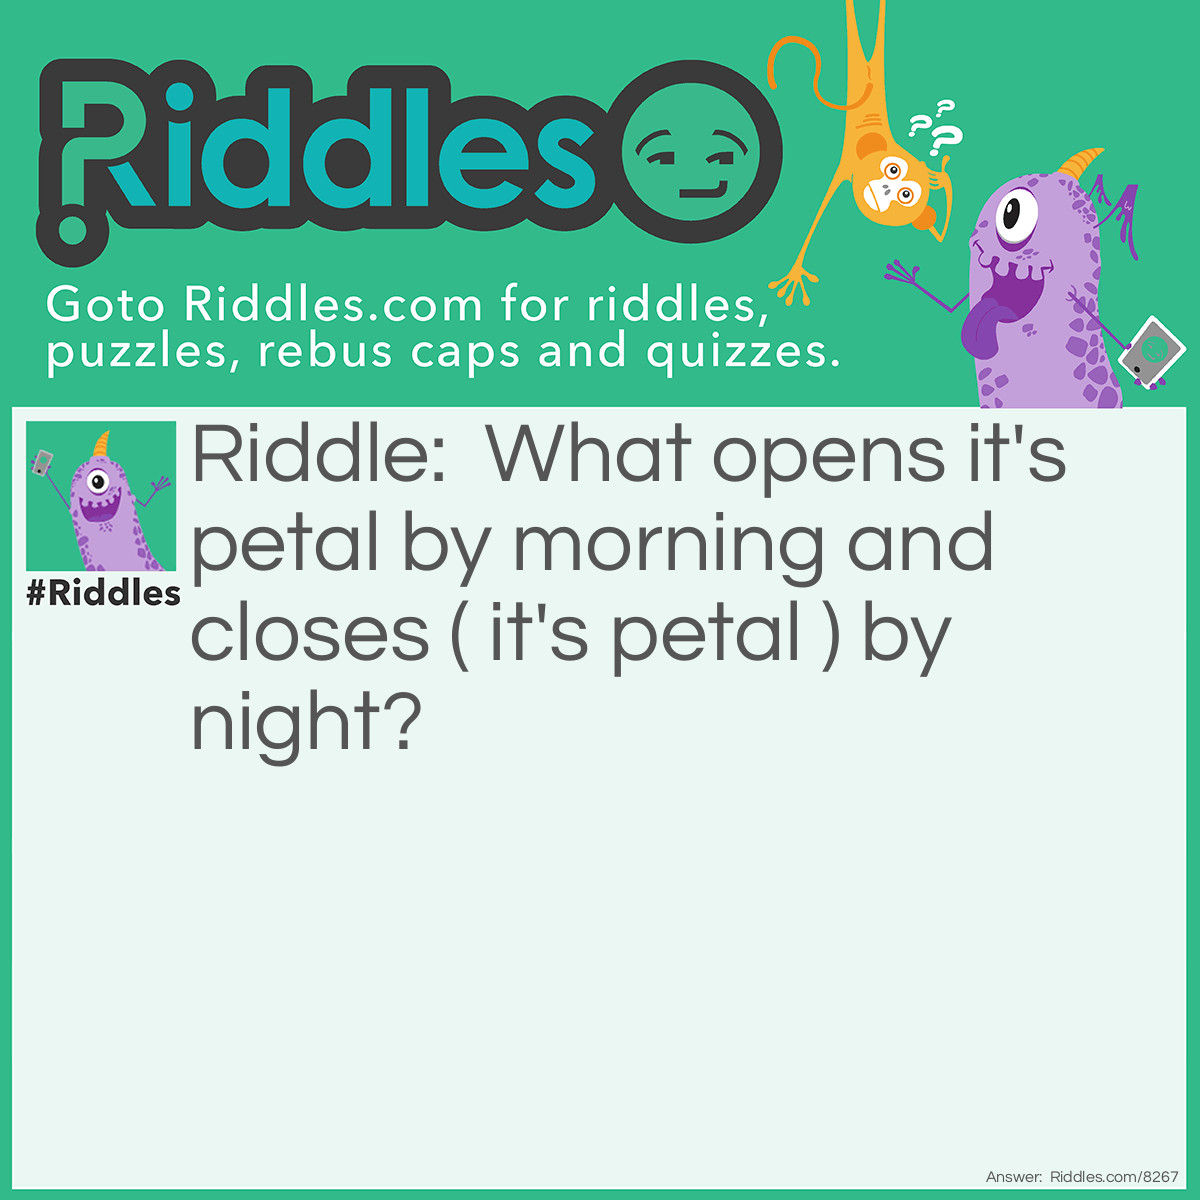 Riddle: What opens it's petal by morning and closes ( it's petal ) by night? Answer: A Daisy.